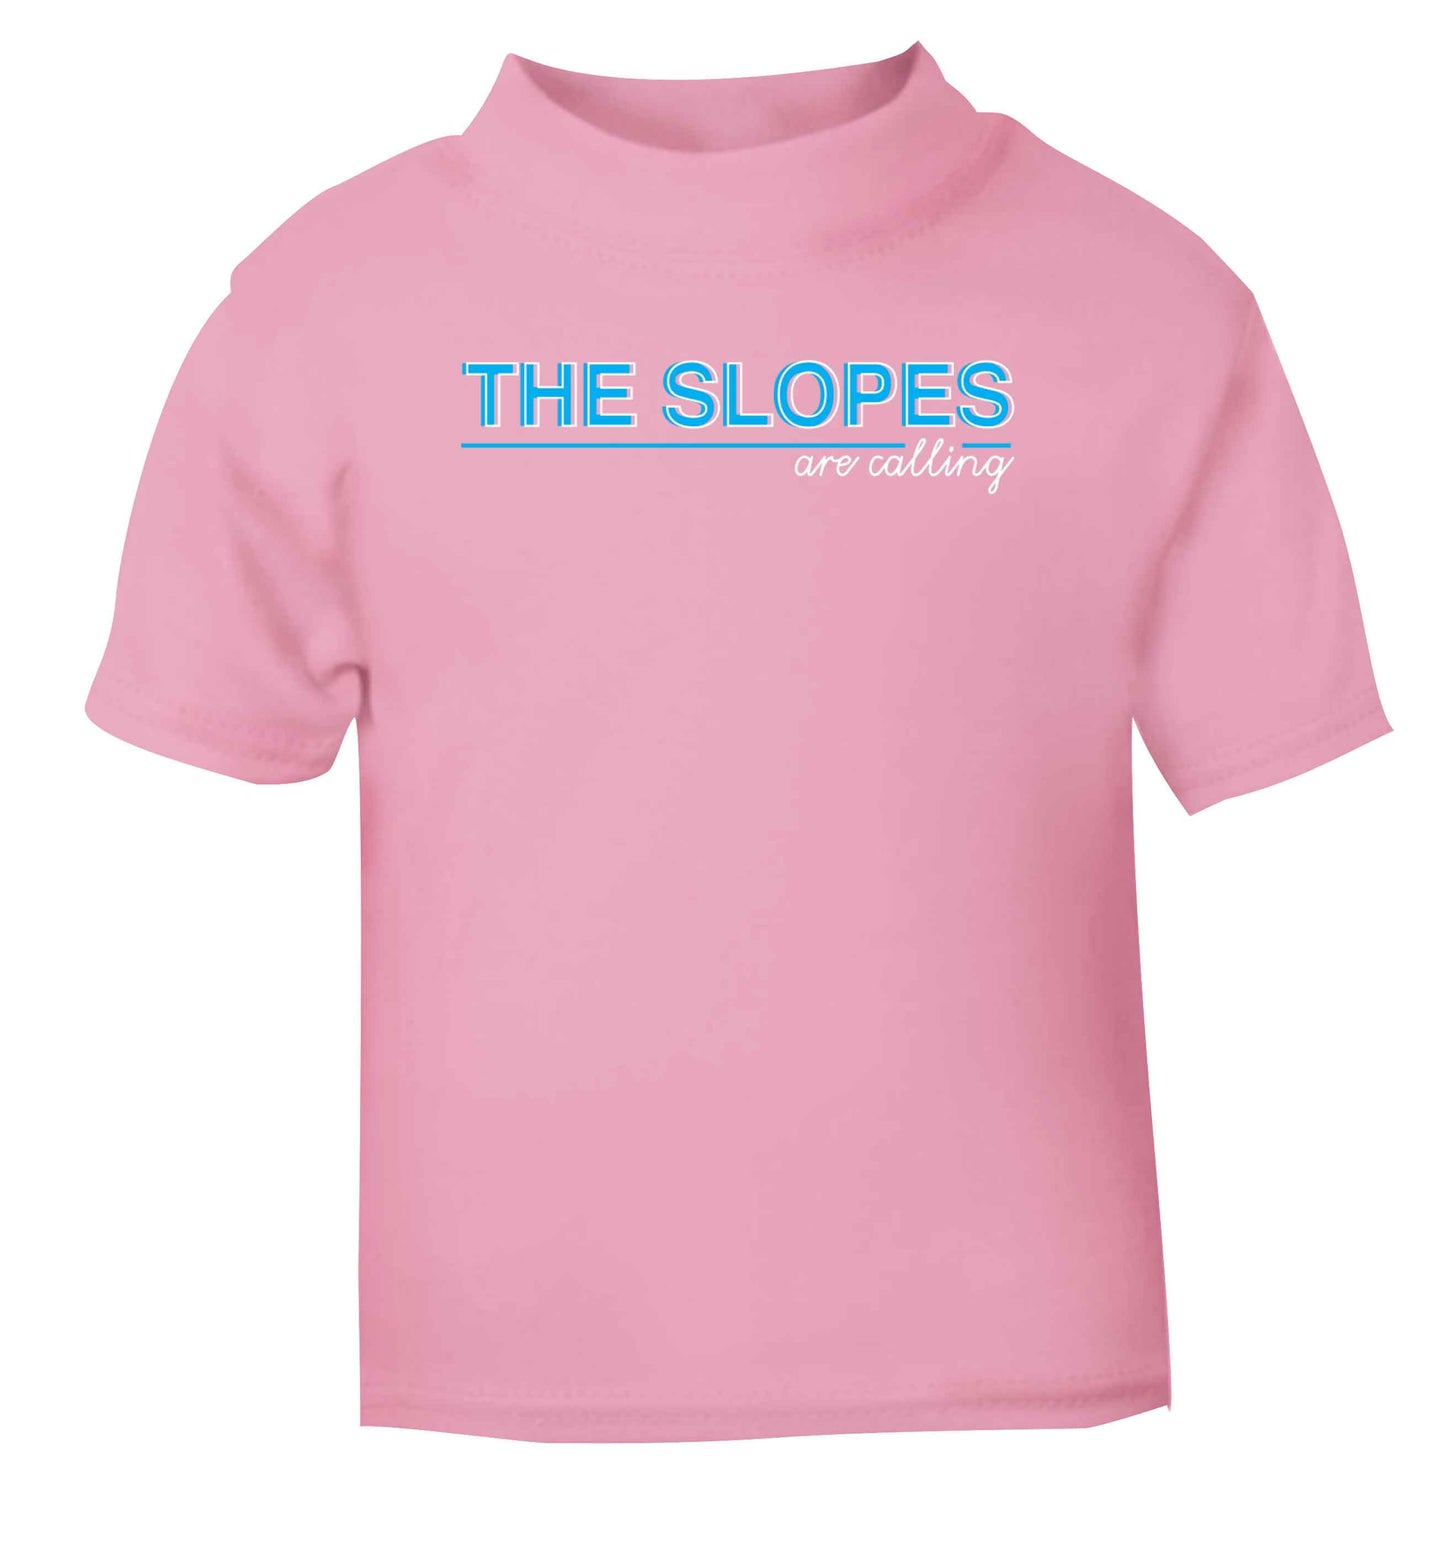 The slopes are calling light pink Baby Toddler Tshirt 2 Years